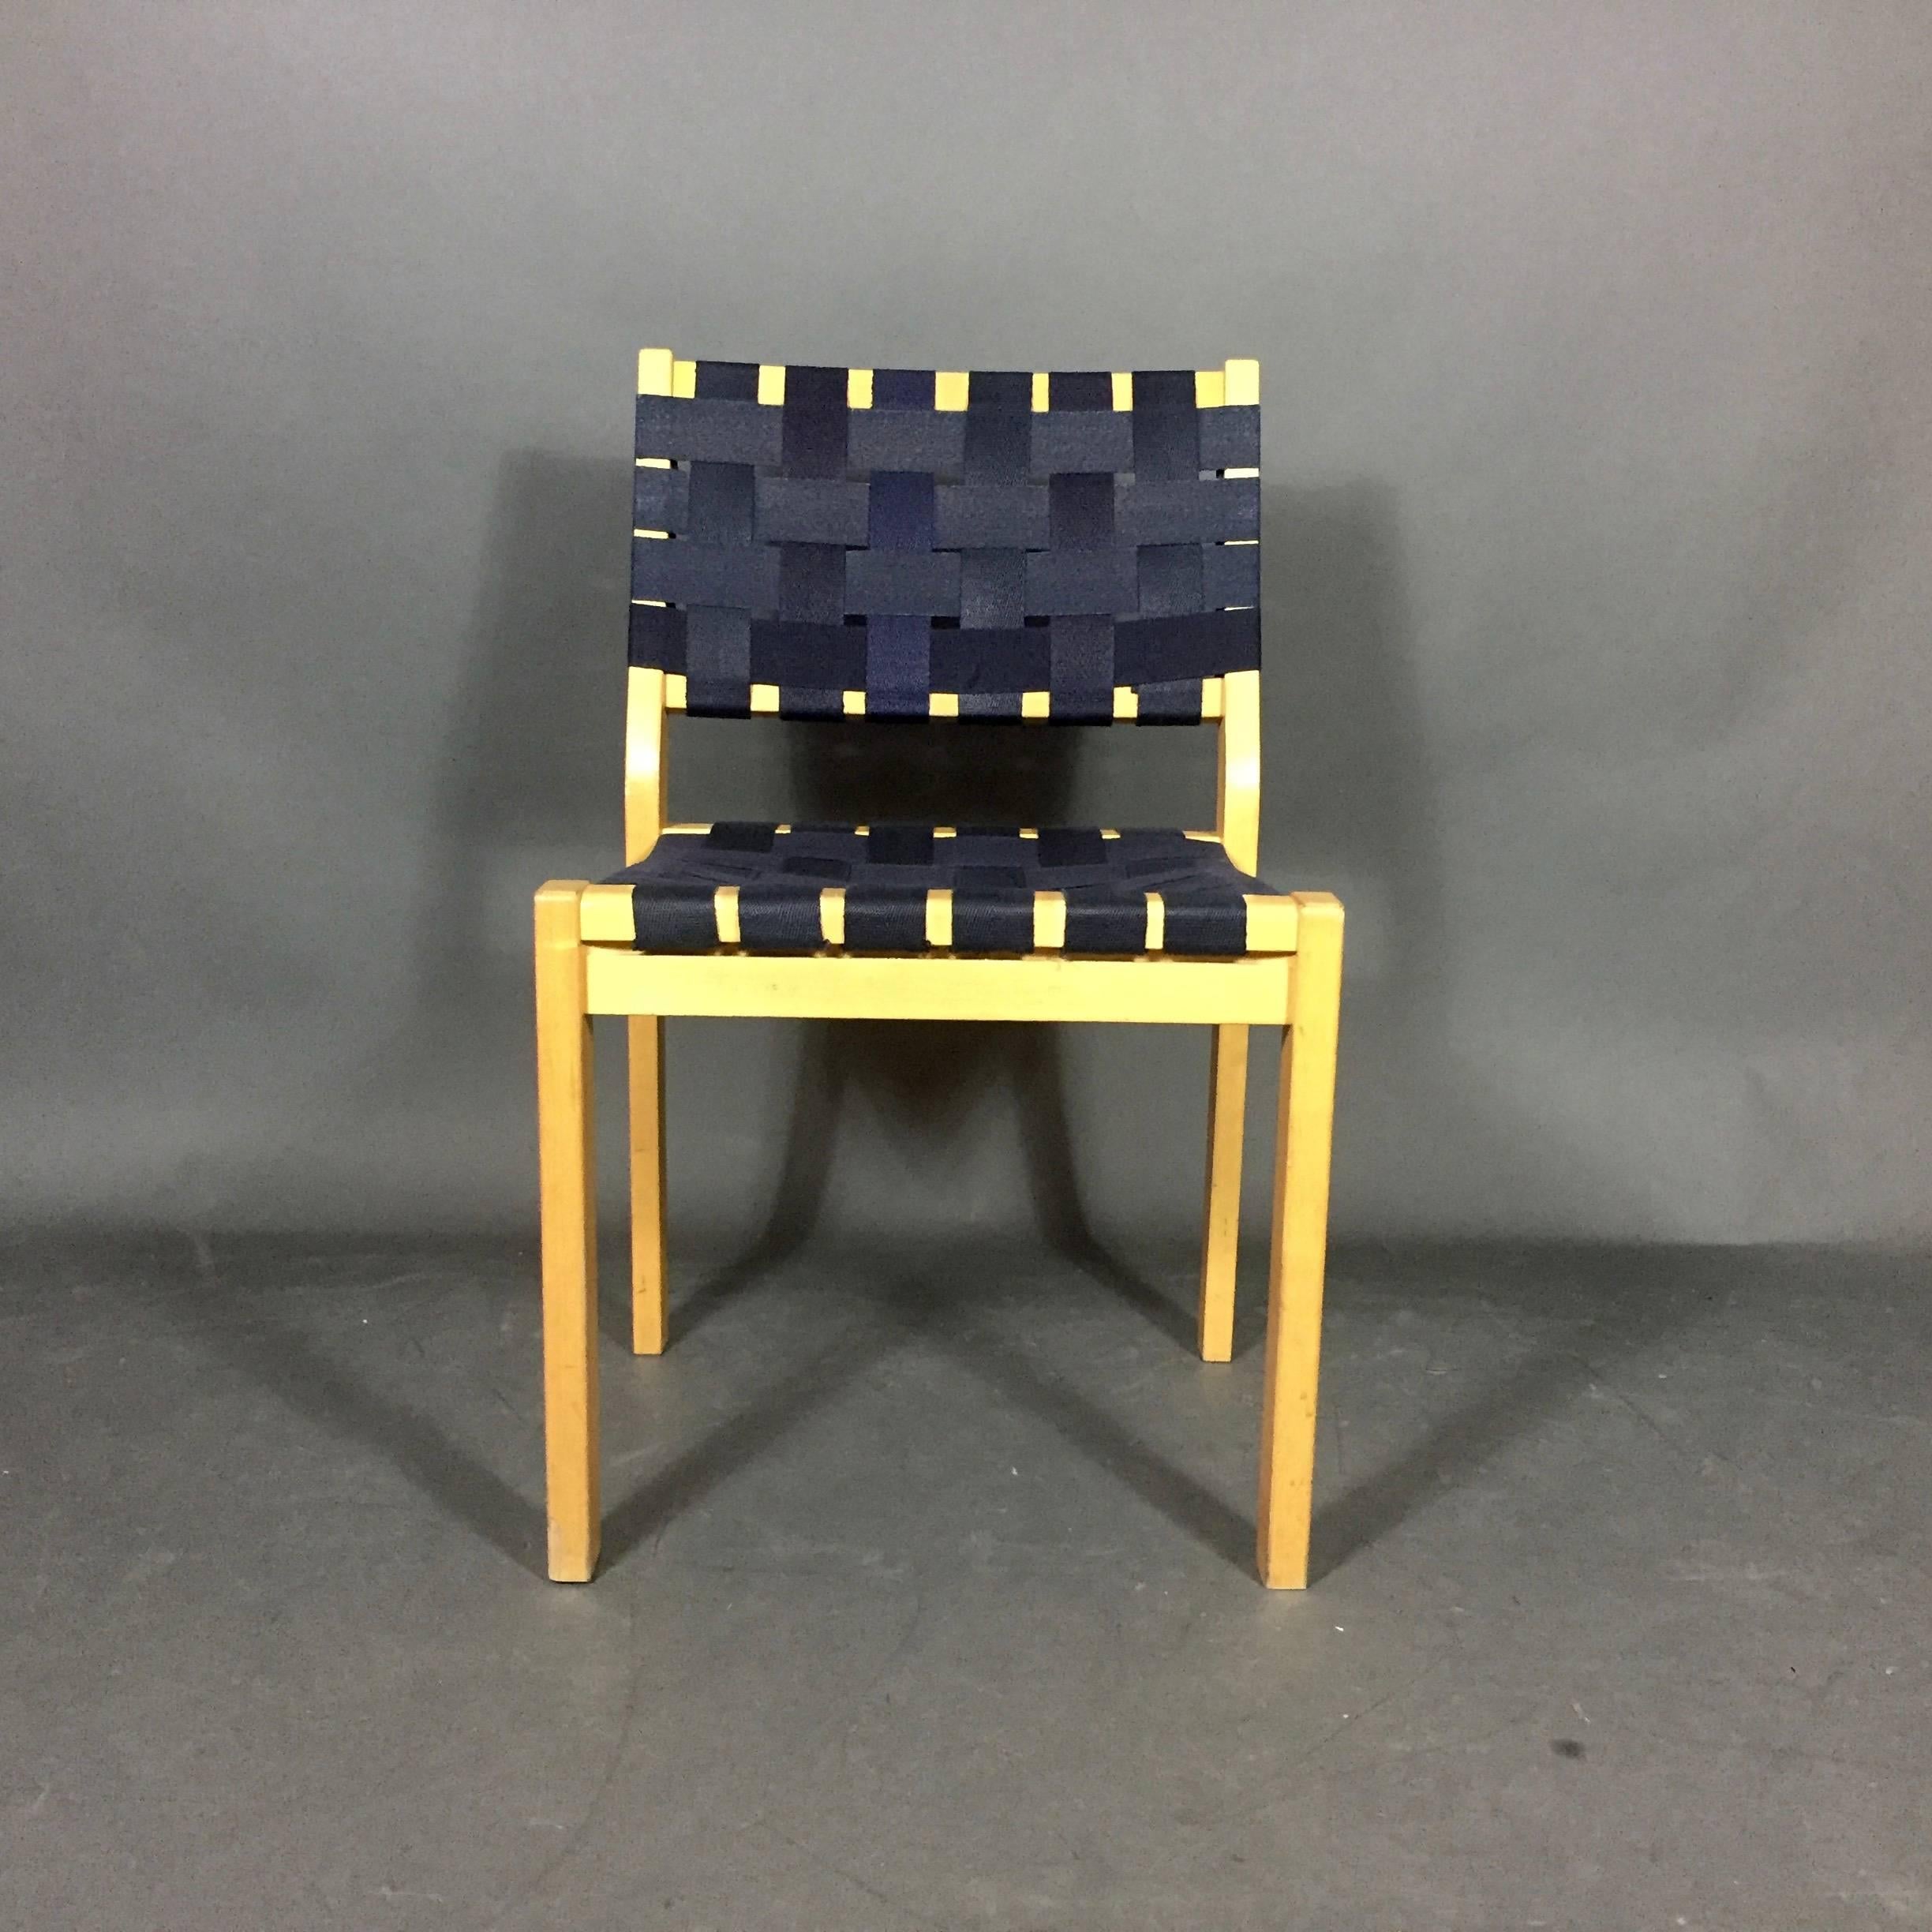 Always technically excellent with simplicity of design - architect Alvar Aalto and his Aino founded the incredible Finish firm Artek. This set of Model 611 dining chairs designed in 1929 are strapped with natural linen in a less common dark blue -